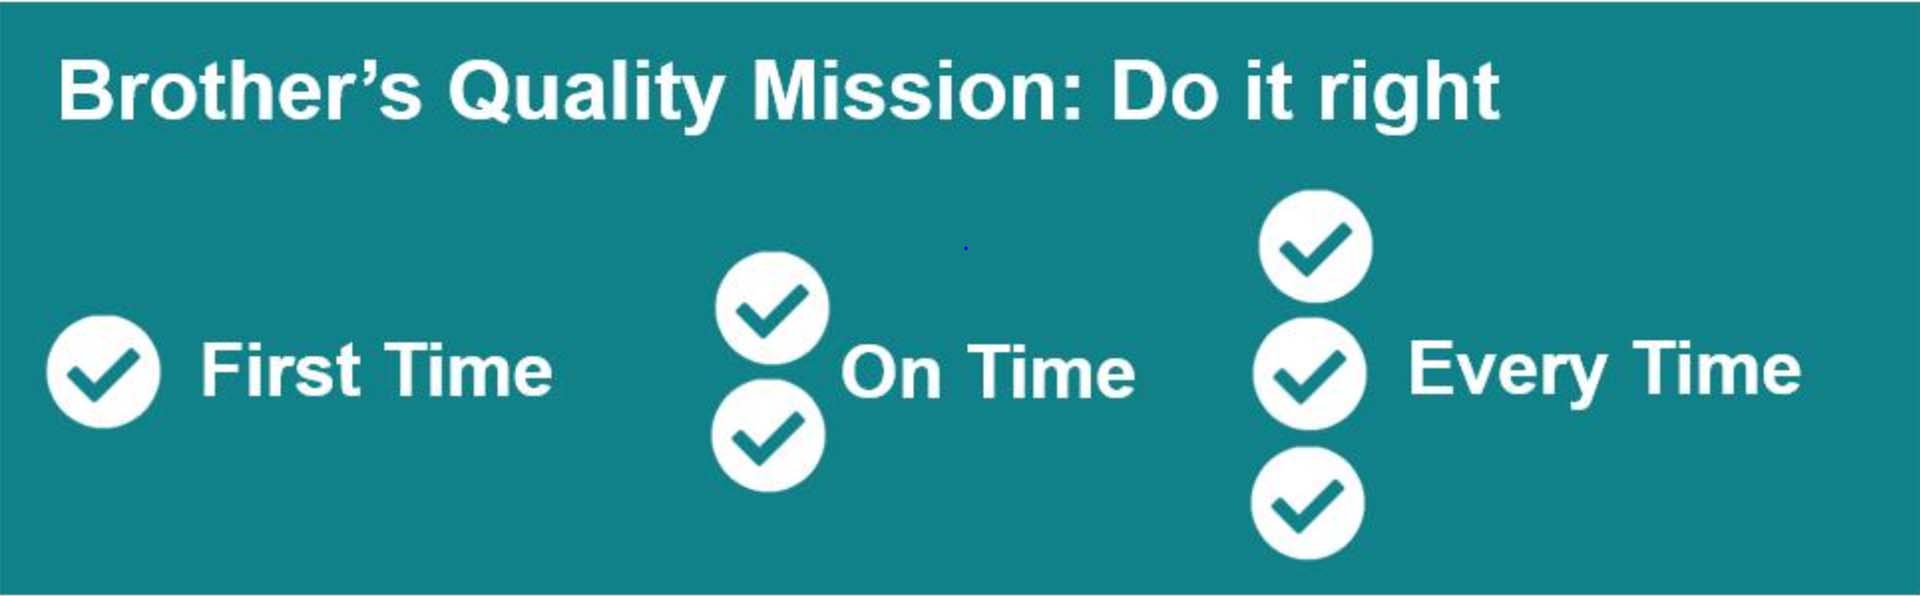 Image of the Brother Quality Mission: 'Do it right, First Time, On Time, Every Time'